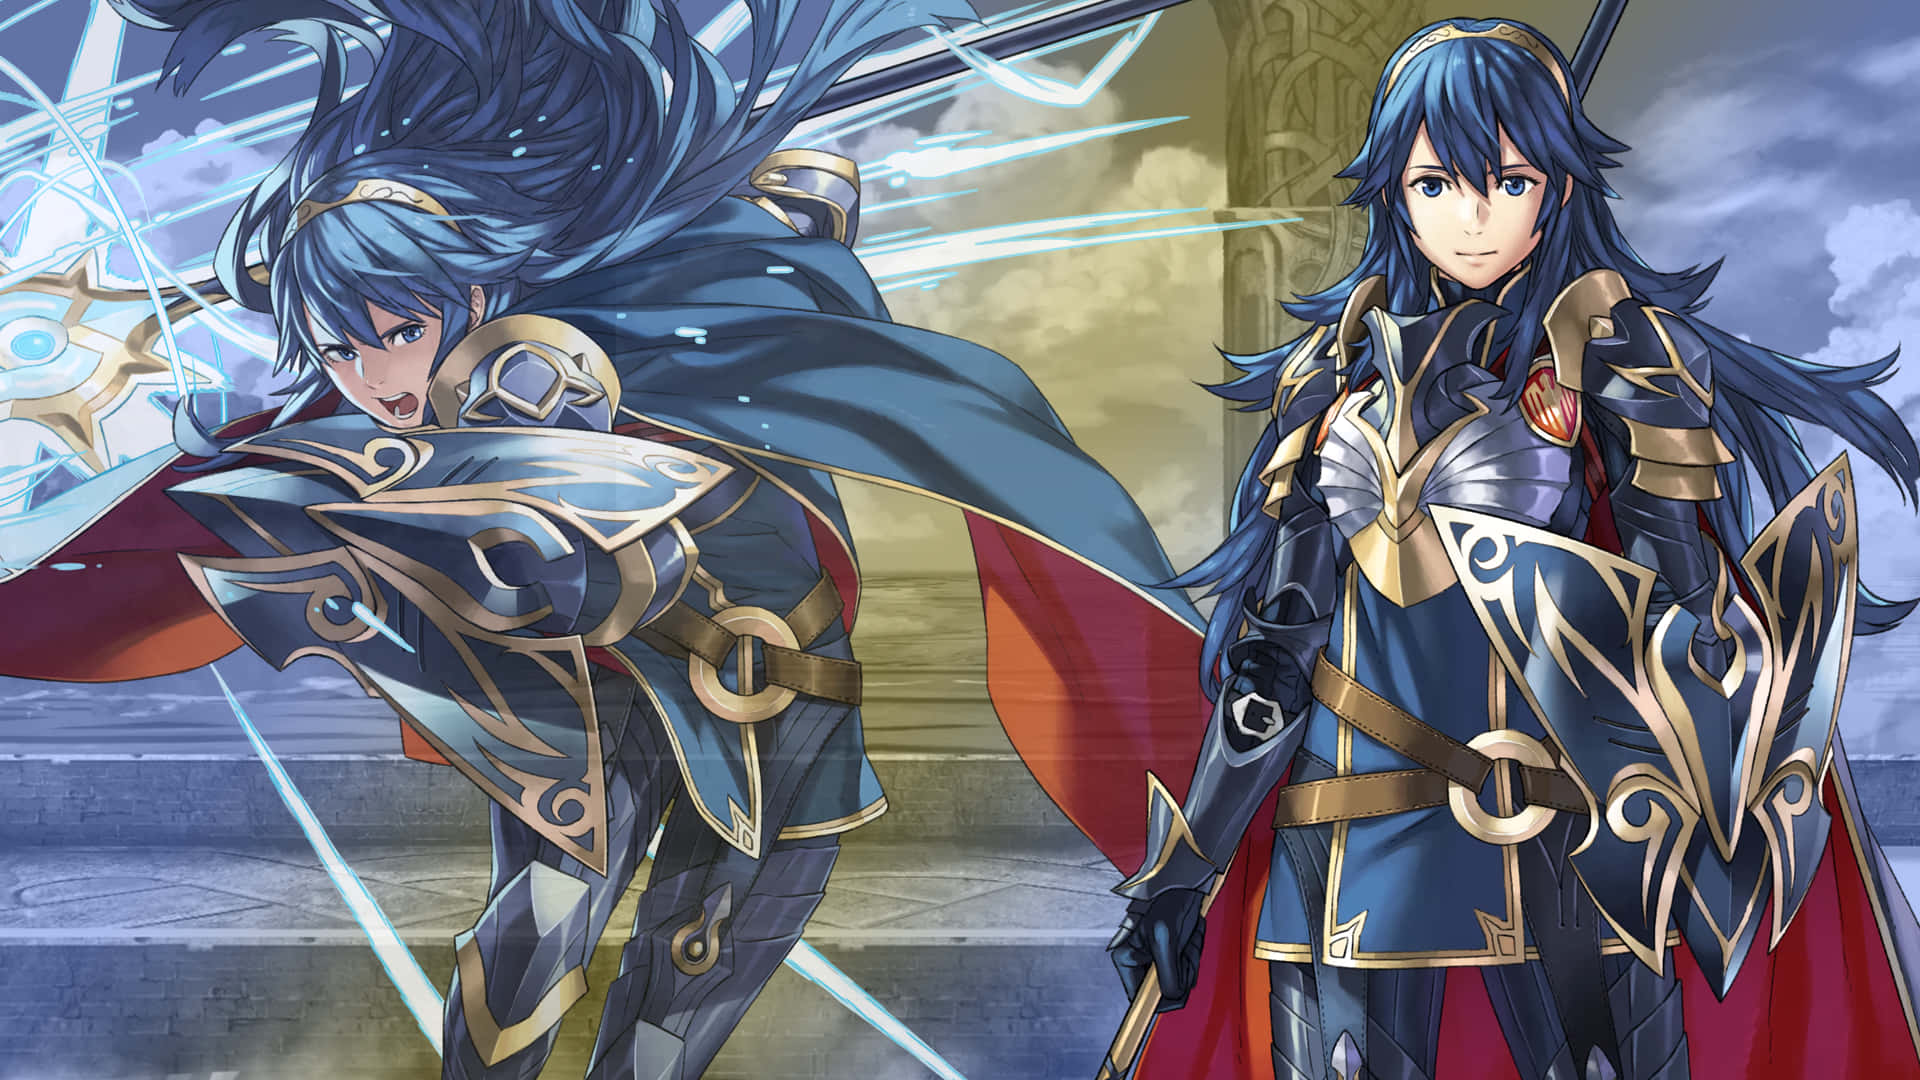 The caring face of Lucina bringing hope to the world. Wallpaper